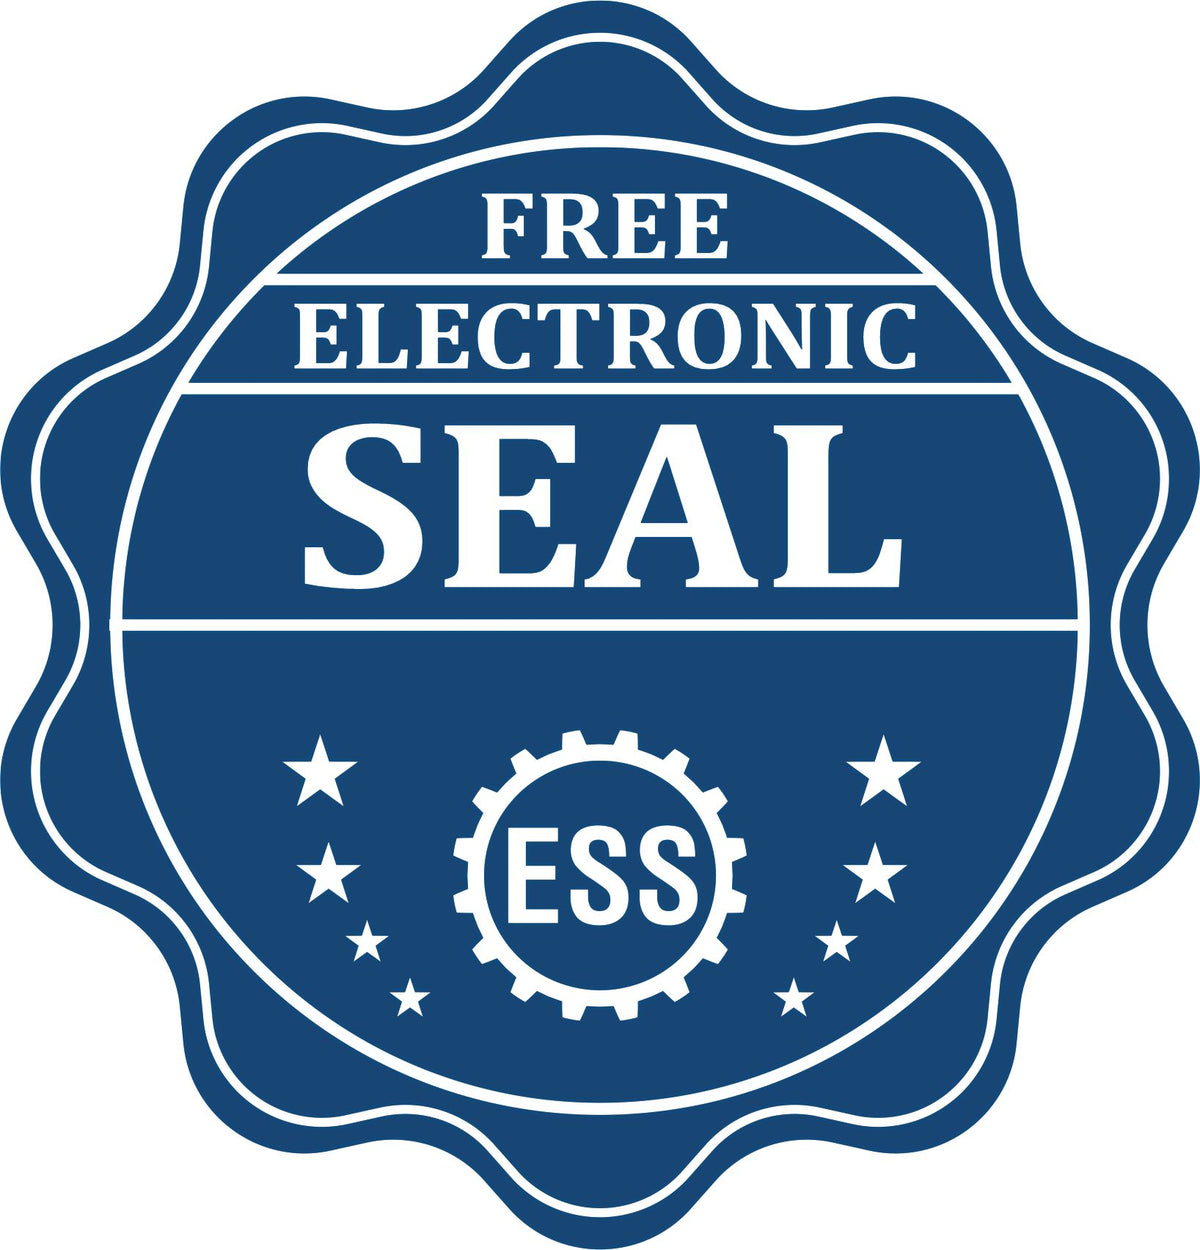 A badge showing a free electronic seal for the Long Reach Michigan Land Surveyor Seal with stars and the ESS gear on the emblem.